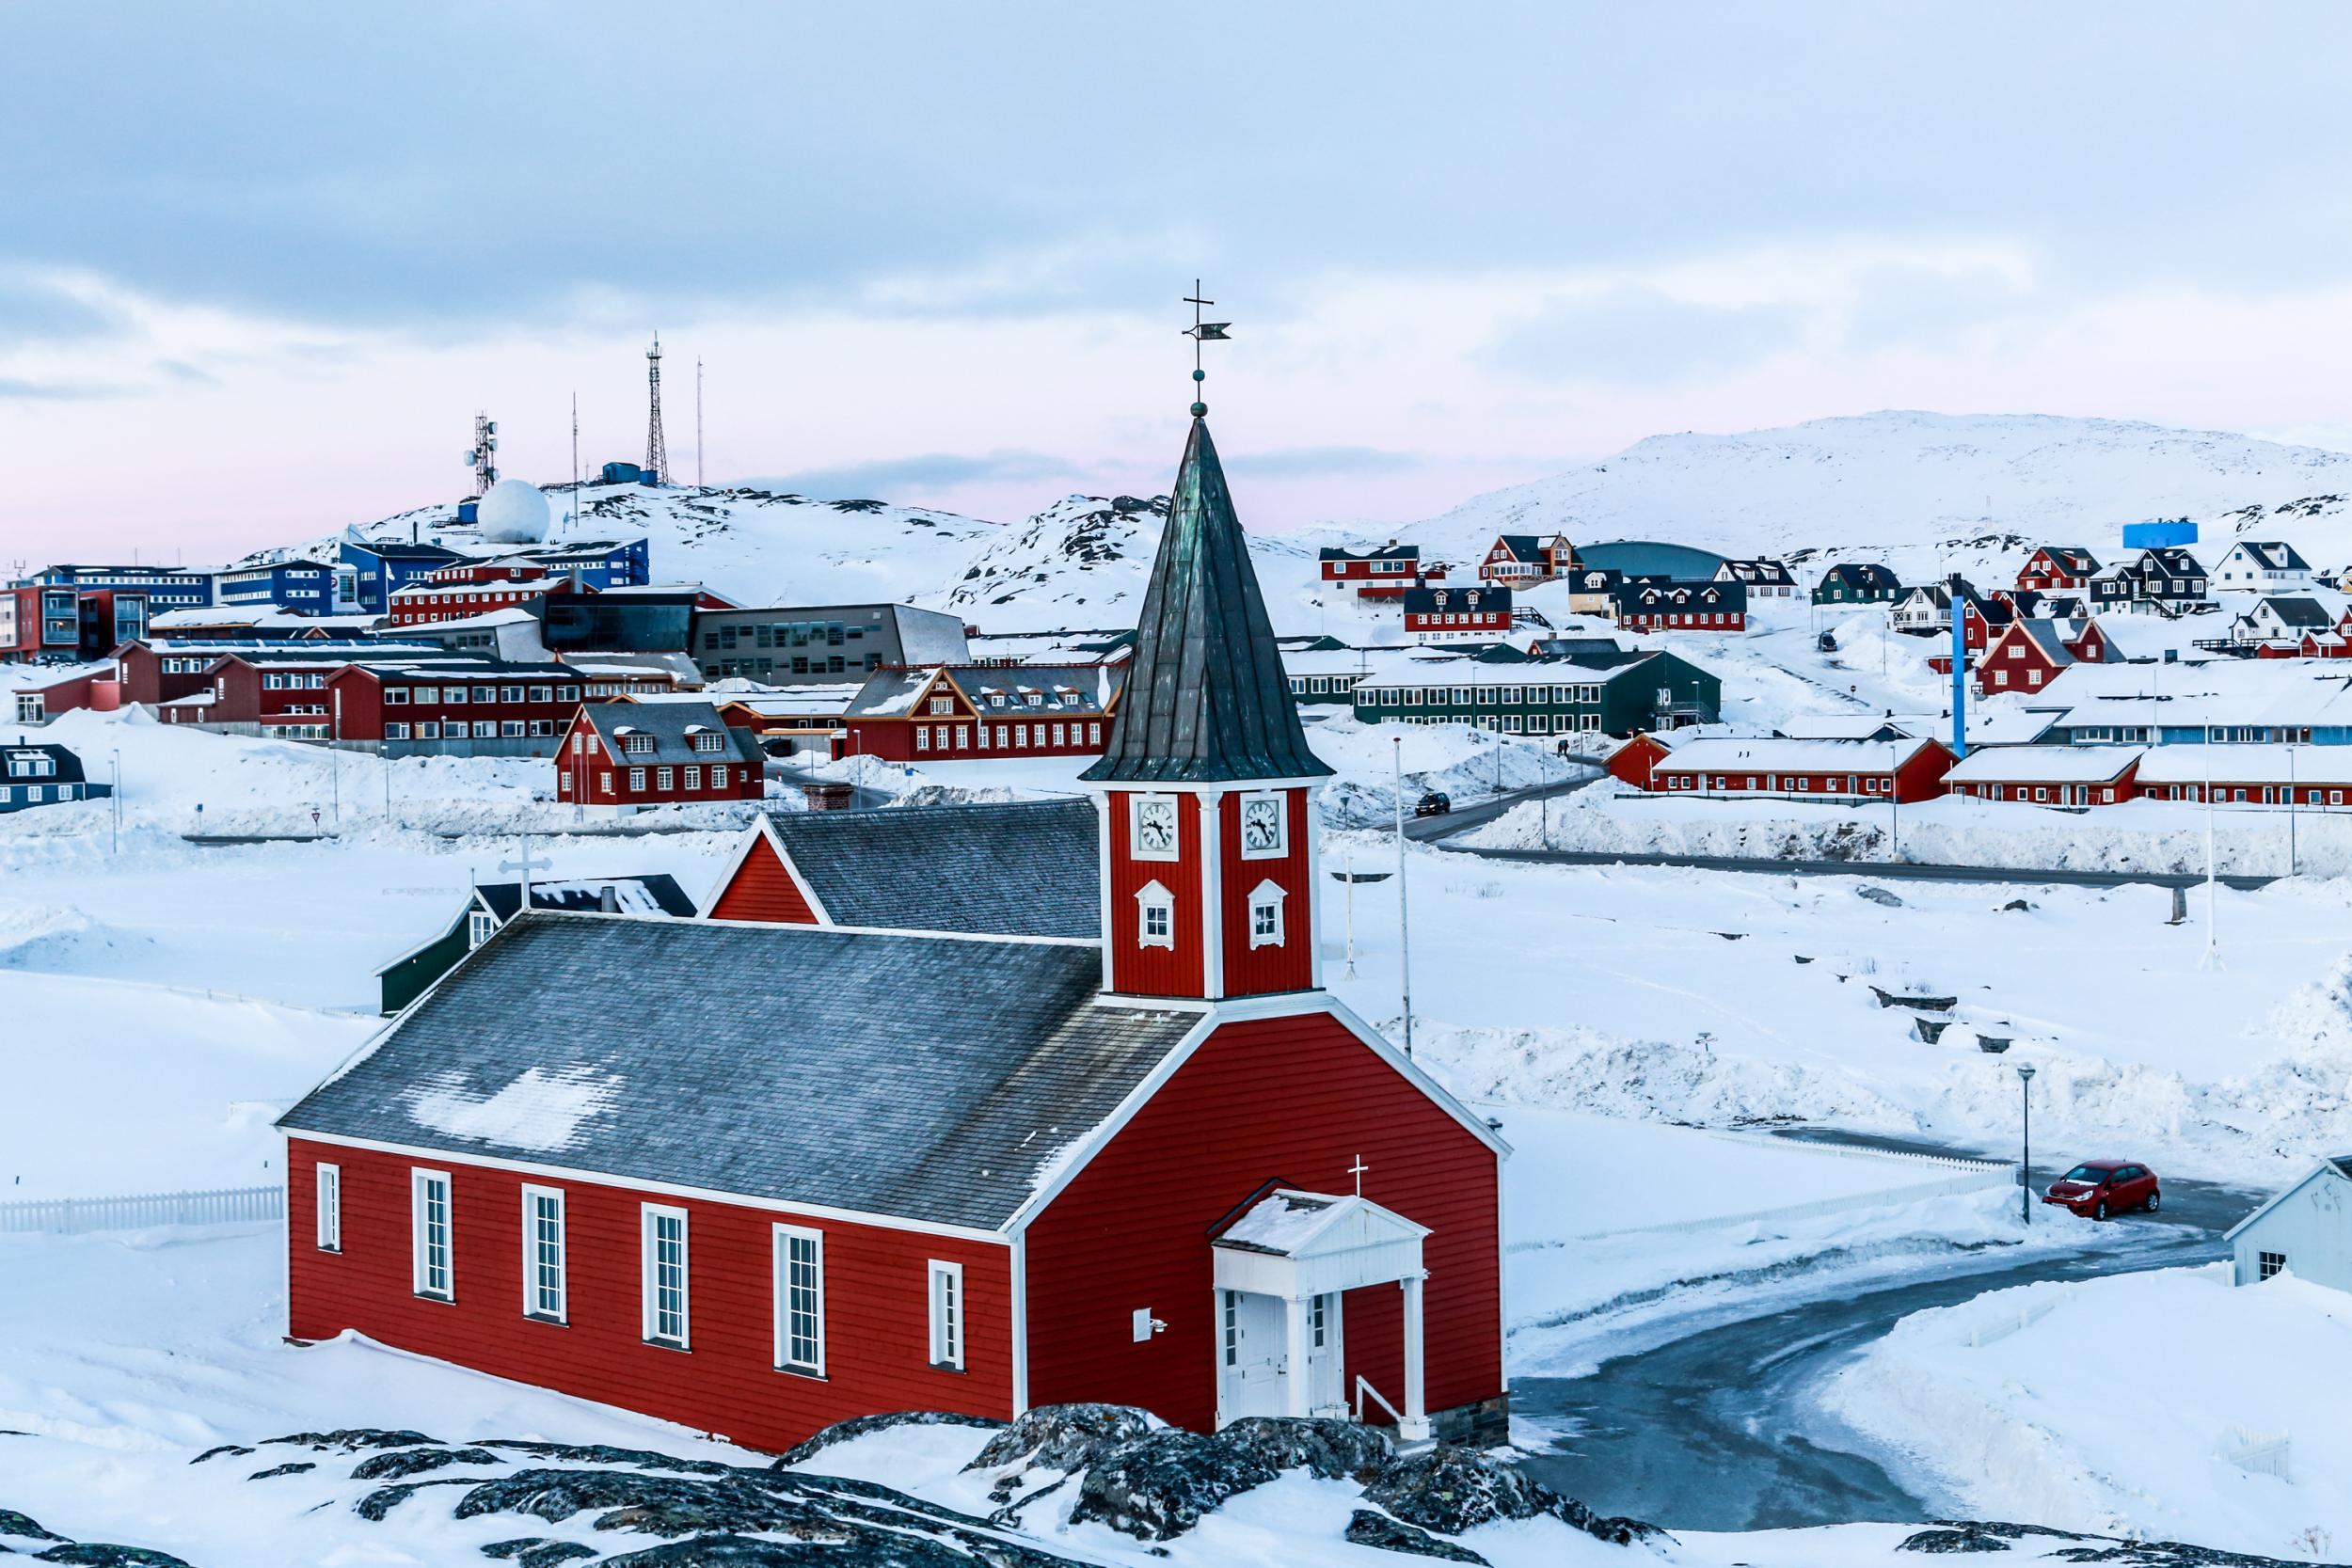 The historical centre of Greenland's capital, Nuuk, with Annaassisitta Oqaluffia, the Church of Our Saviour, in the foreground